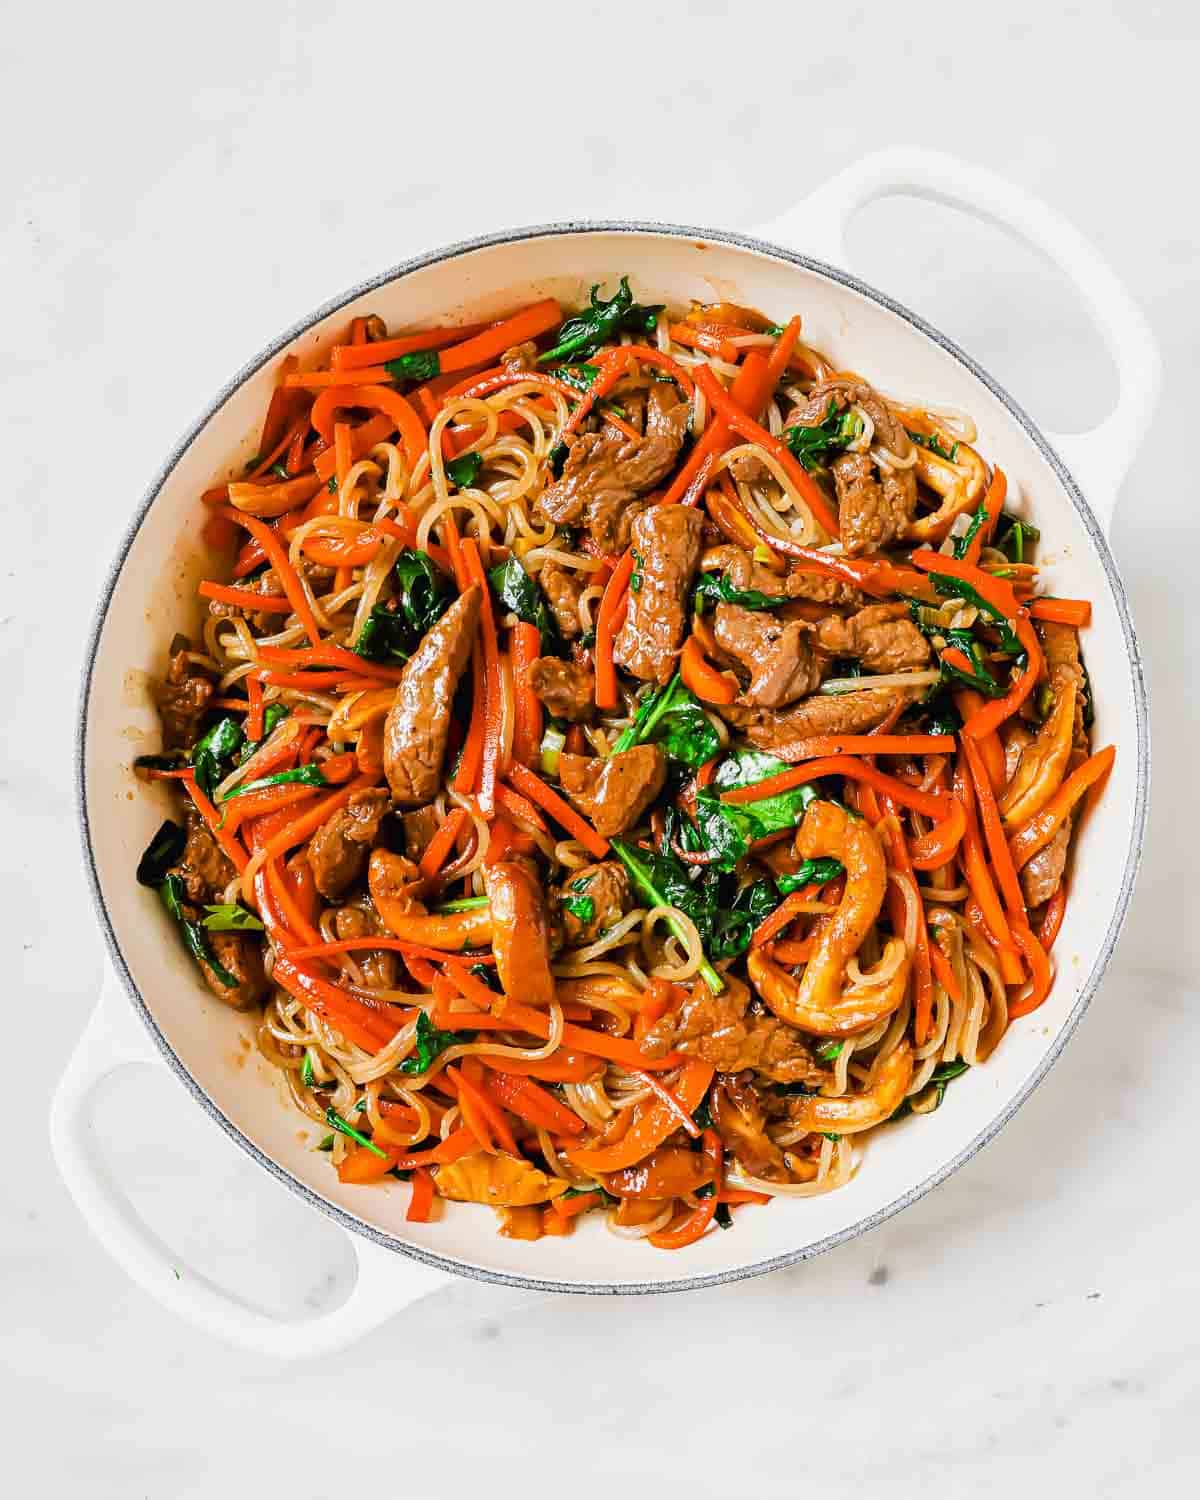 A pan full of noodles with meat and vegetables.